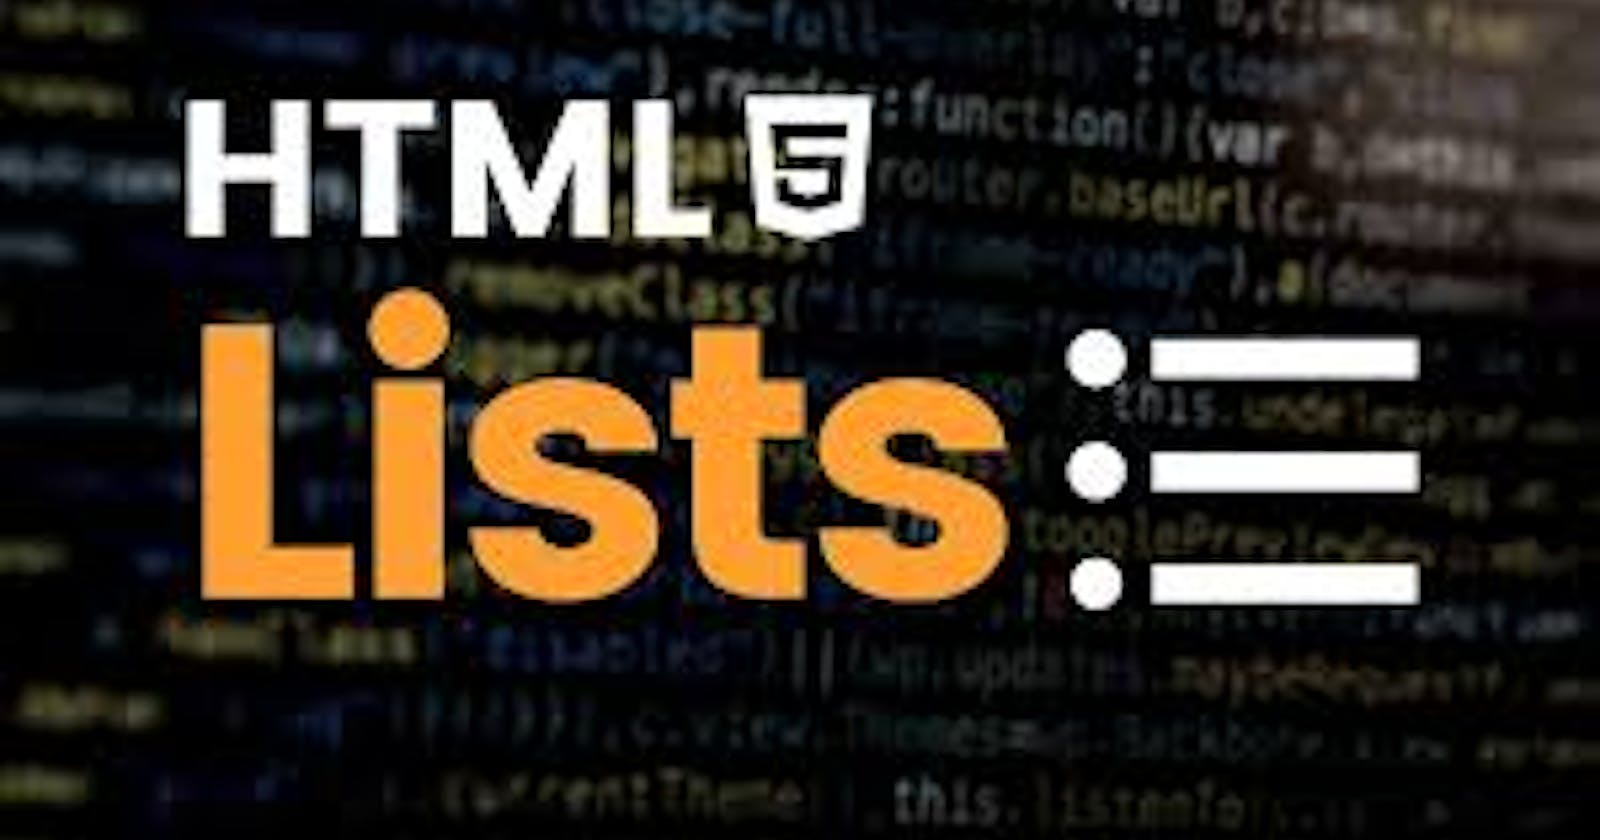 Learn about HTML lists